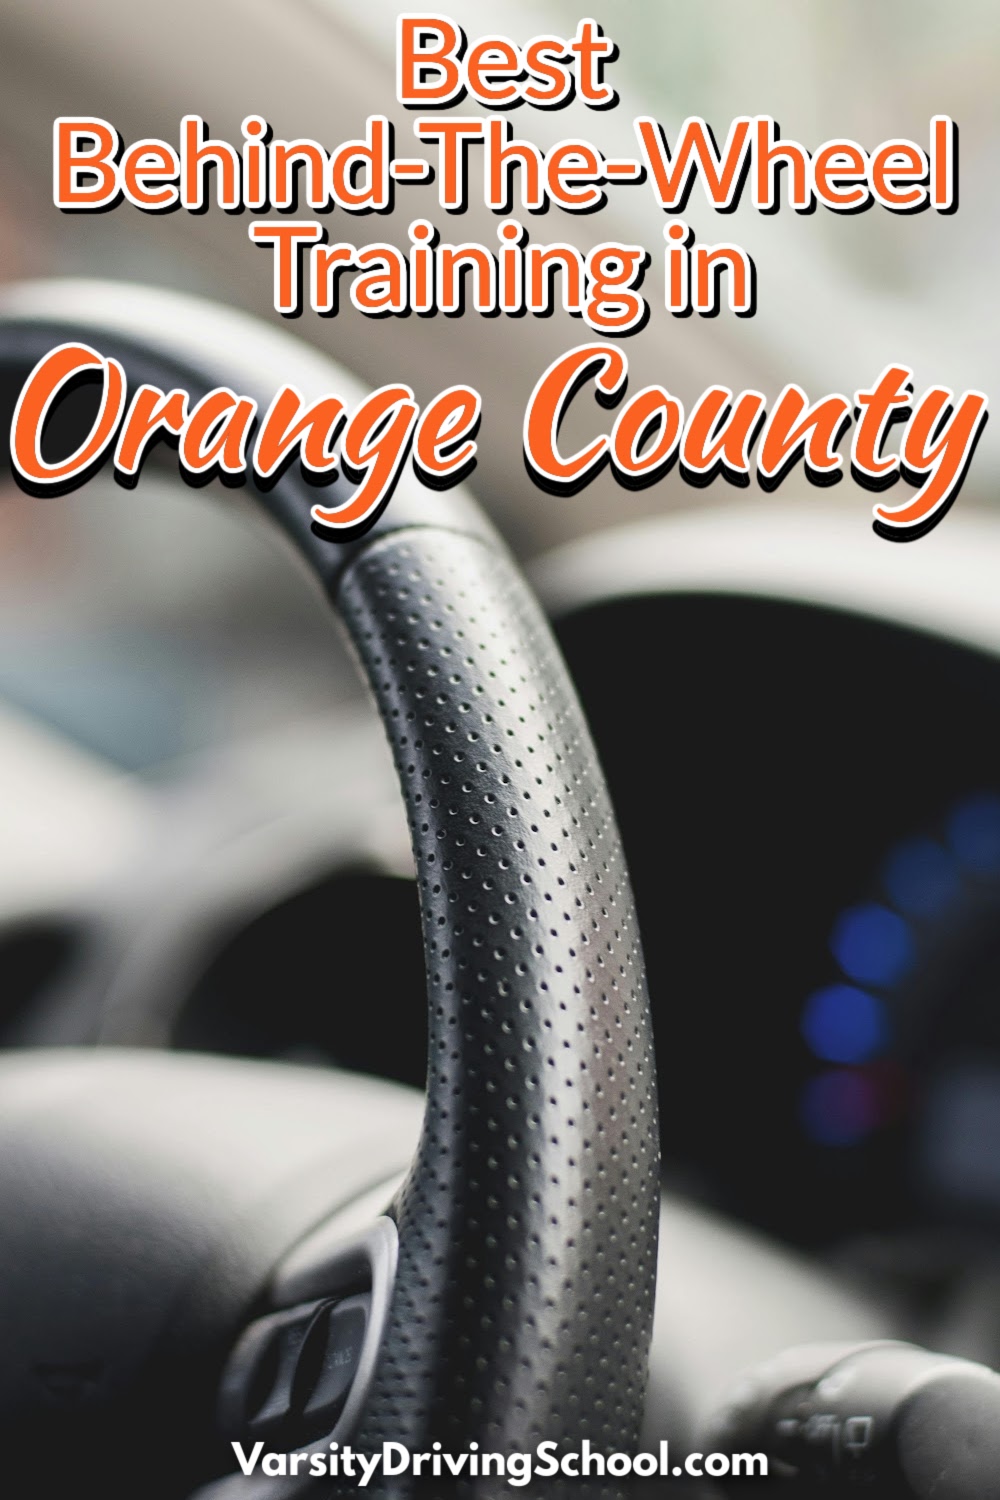 The best behind the wheel training in Orange County can be found at Varsity Driving Academy for both teens and adults.